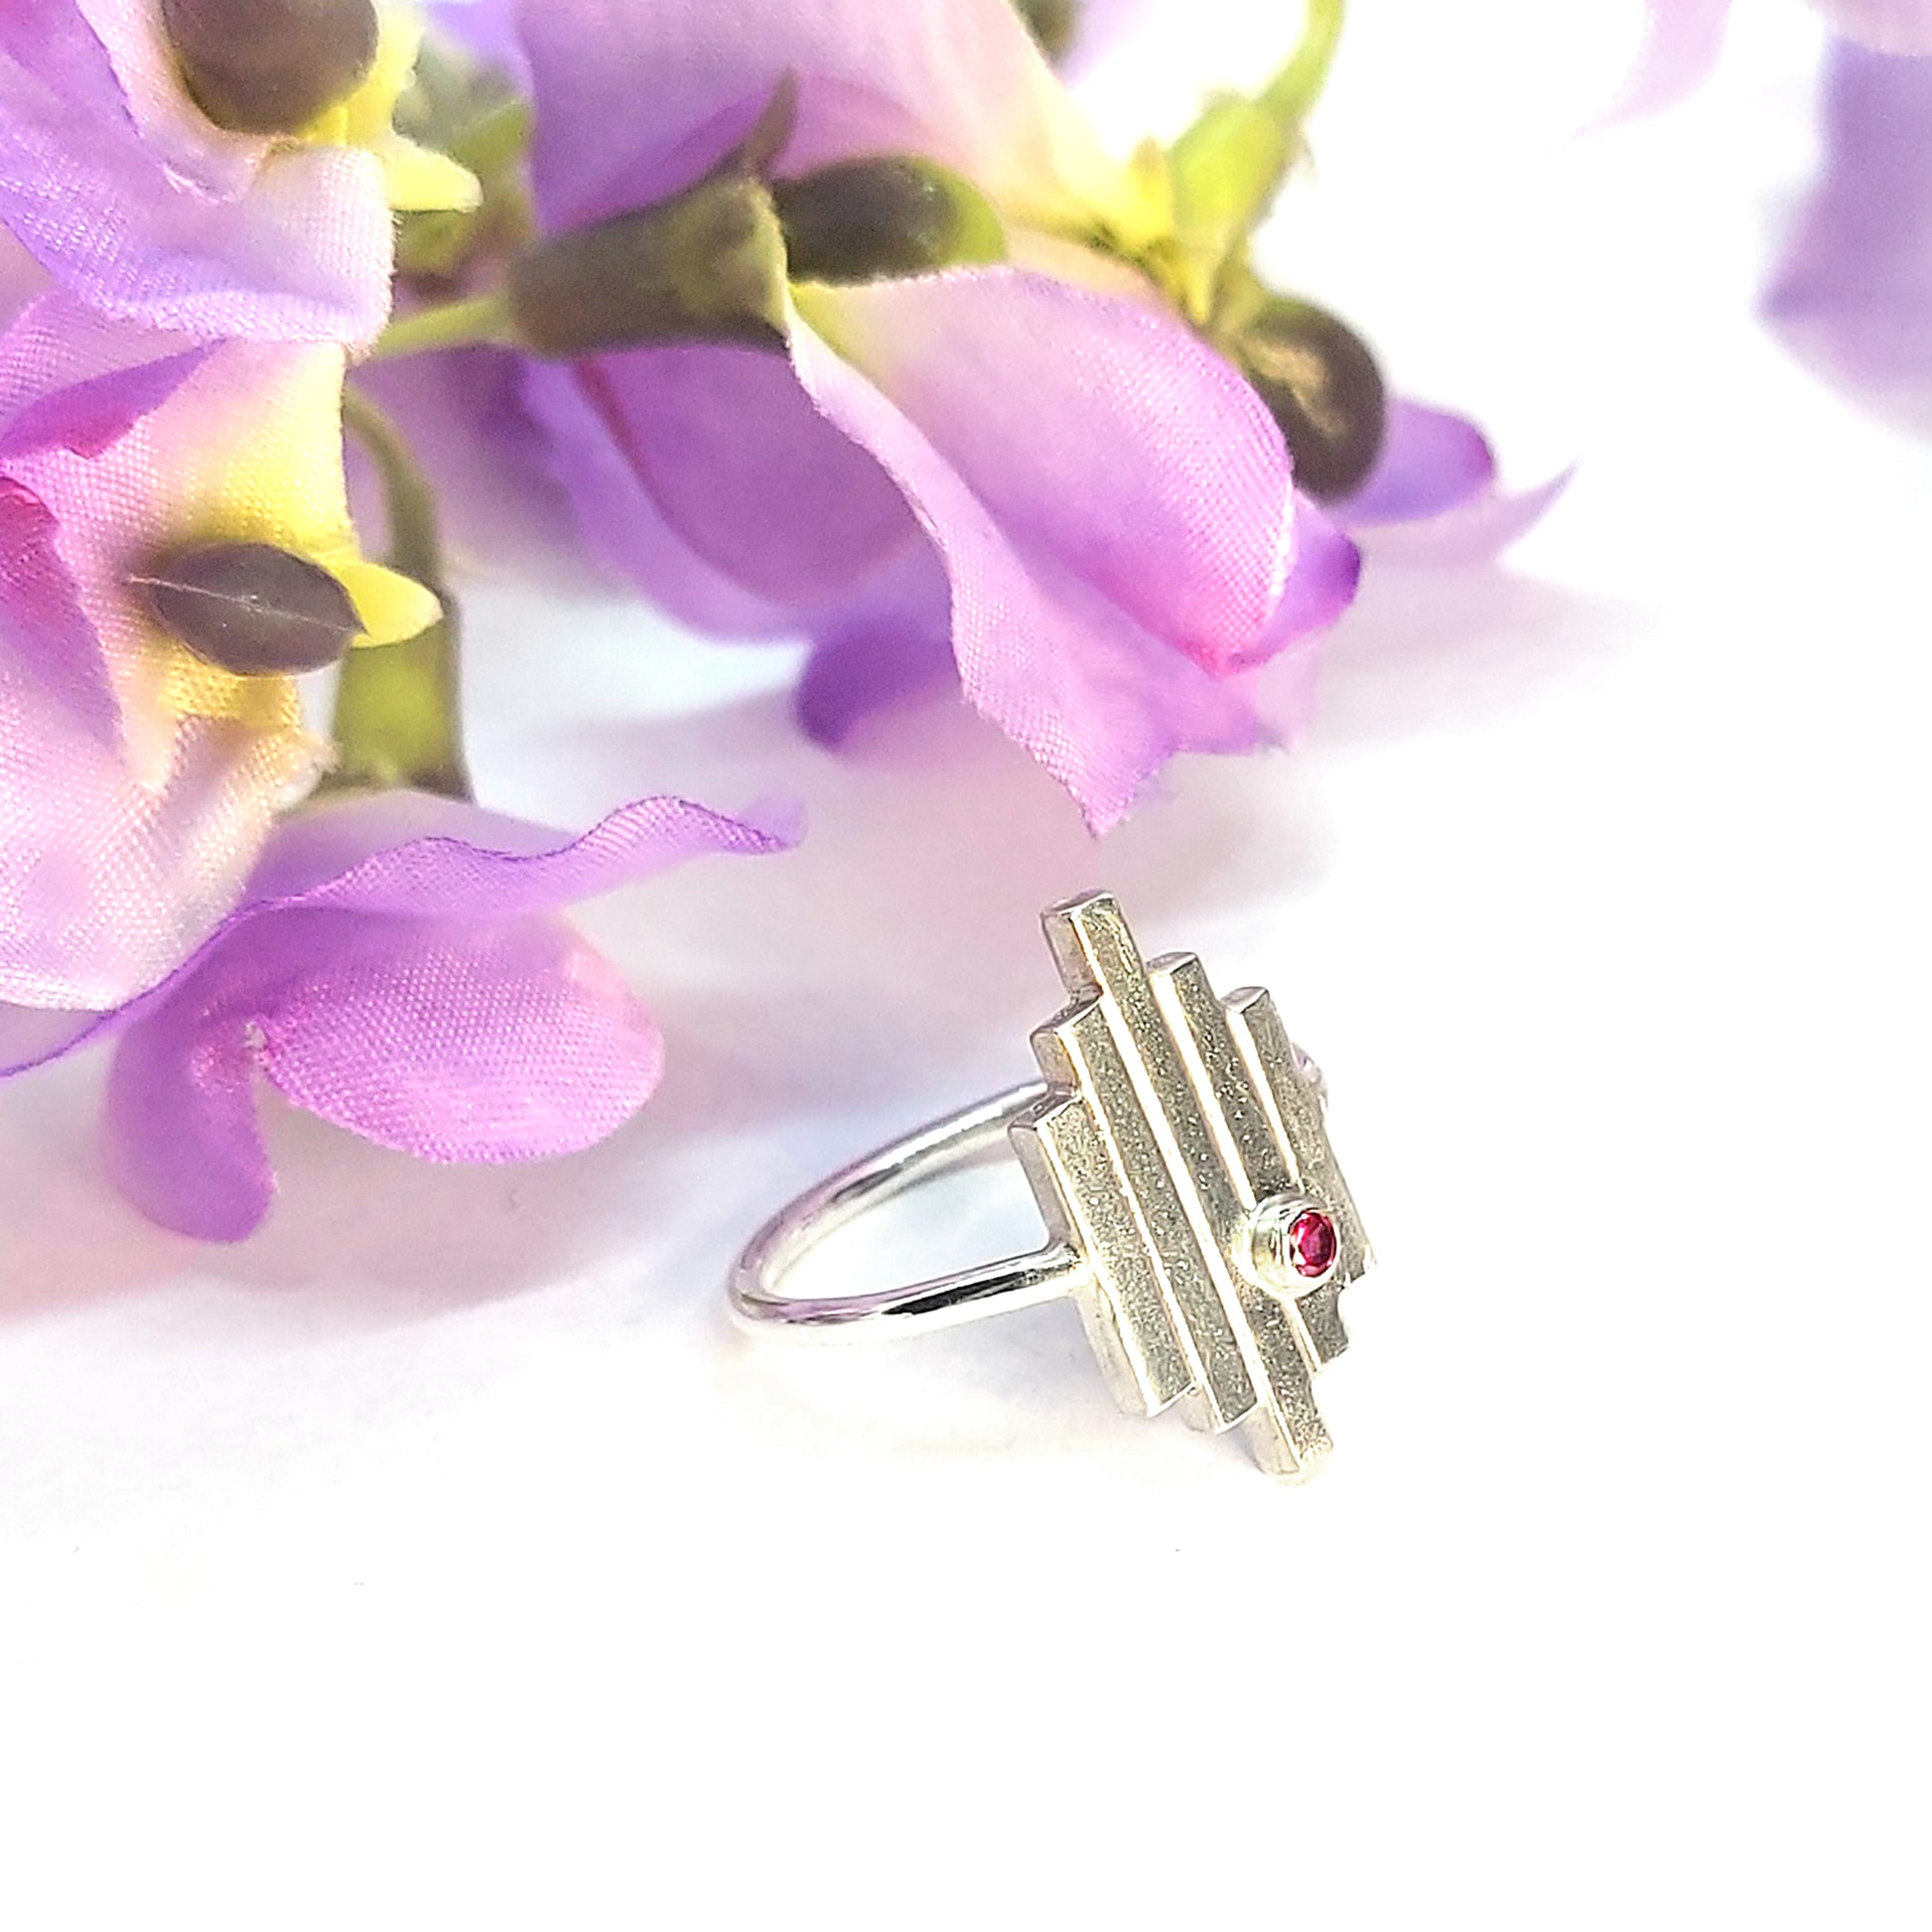 An Art Deco style silver ring with 5 straight lines and an off-centre pinky red ruby. Pictured with flowers.